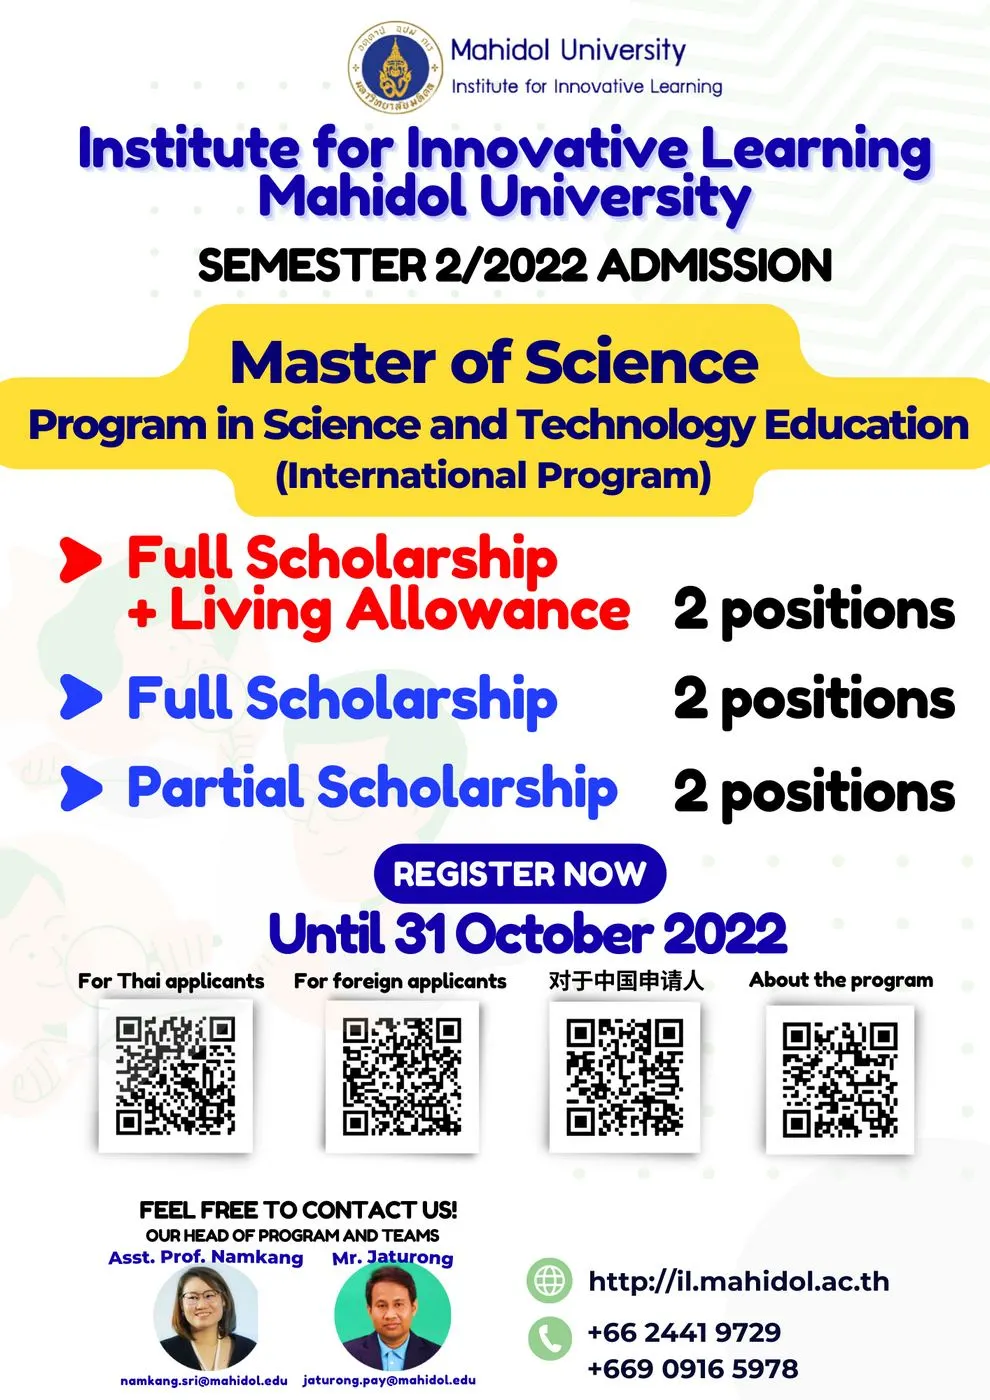 Scholarship for Admission in Semester 2, Academic Year 2022 in Master of Science Program in Science and Technology Education (International Program).